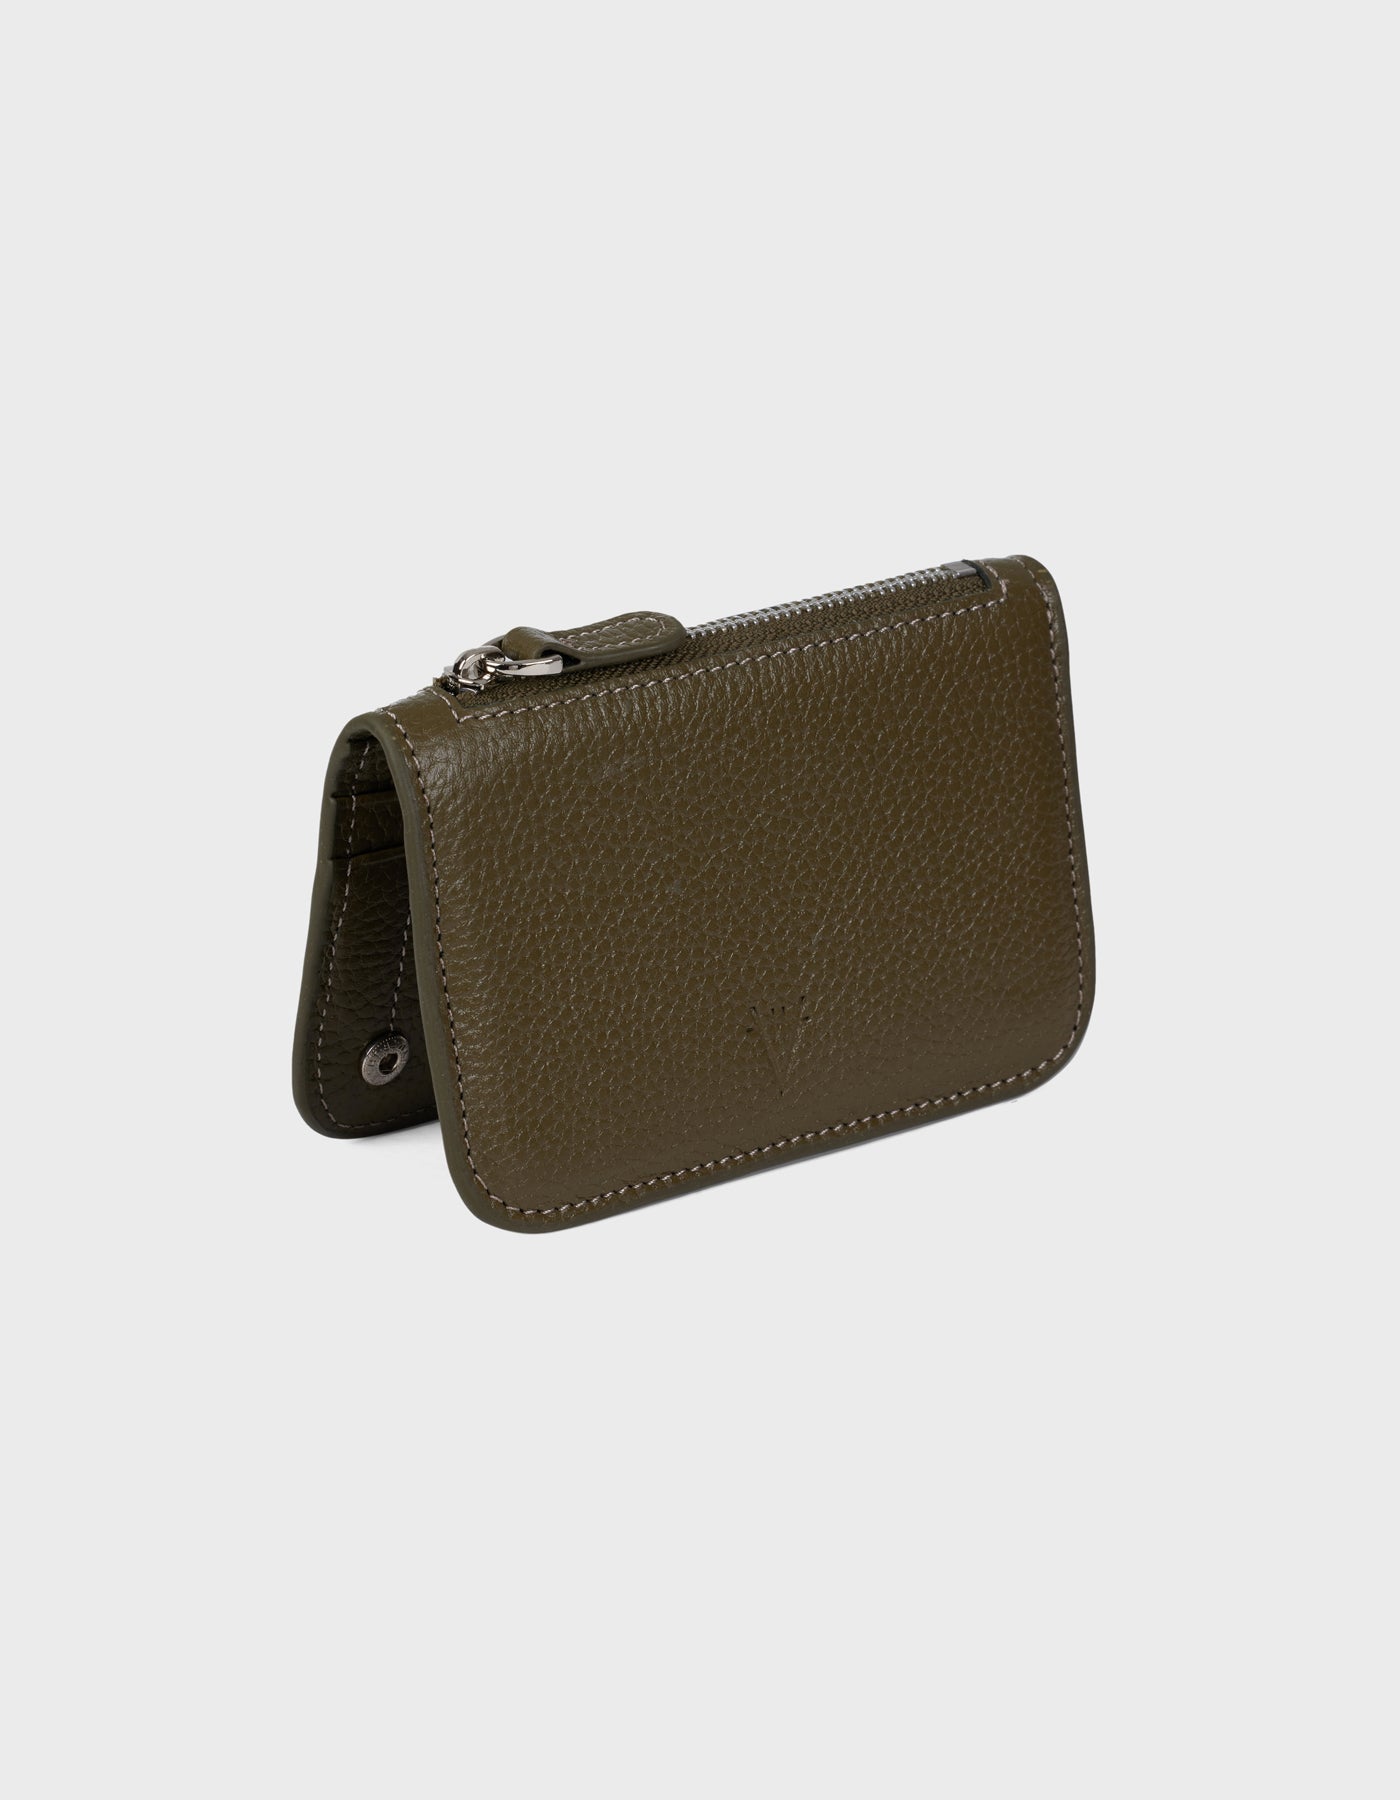 Alae Coin Purse & Card Holder - Finest Quality HiVa Atelier GmbH Leather Accessories